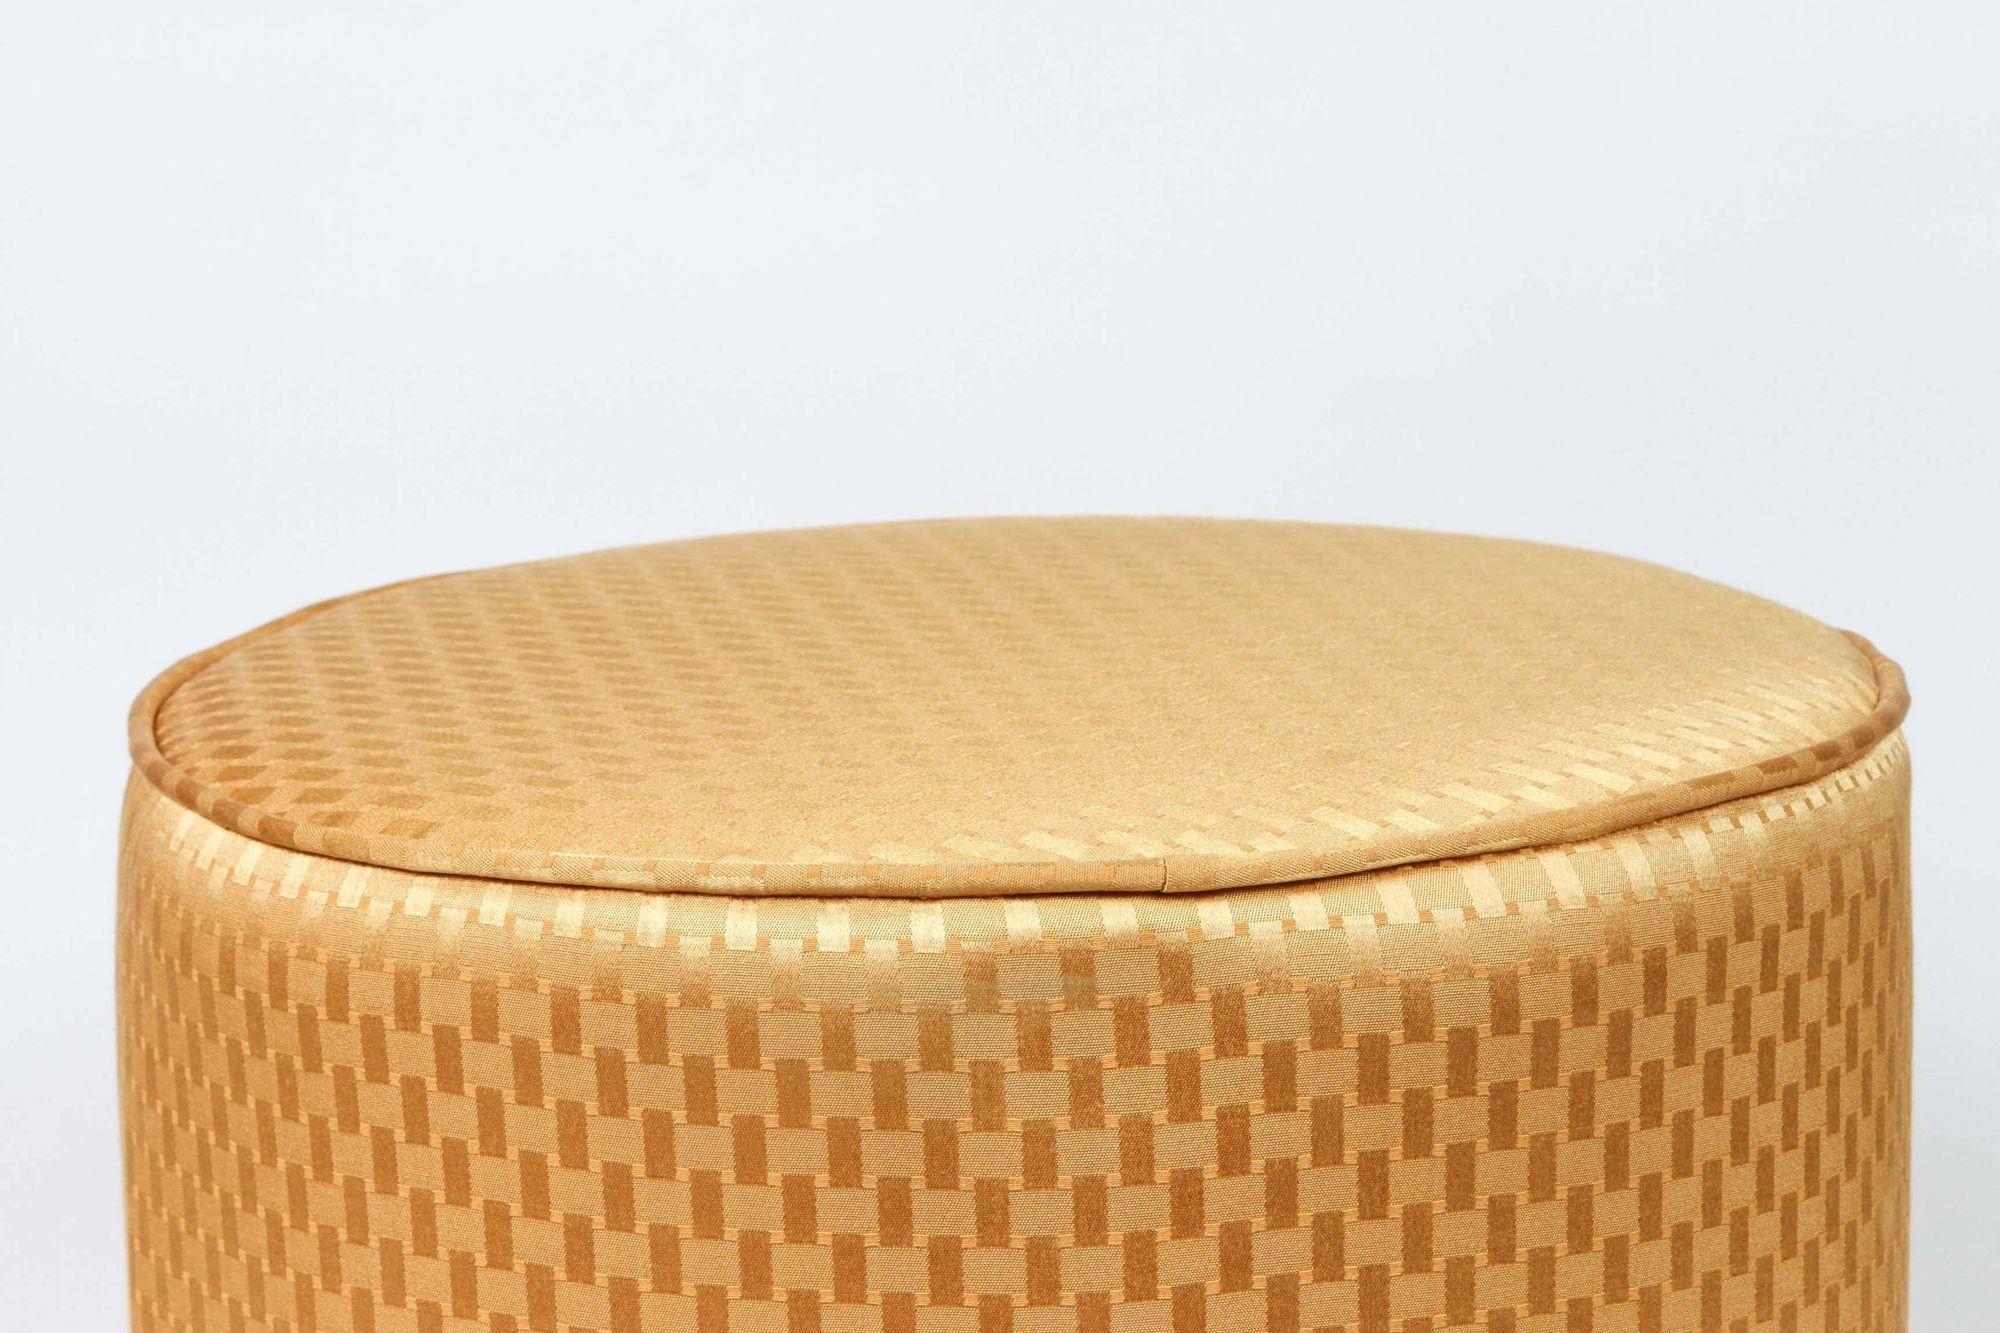 Modern contemporary round Moroccan style stool in gold fabric upholstery in 1970s style.
Moroccan little pouf hassock, upholstered footstool or modern circular ottoman.
This versatile accent piece, pouf is designed primarily for seating but can be